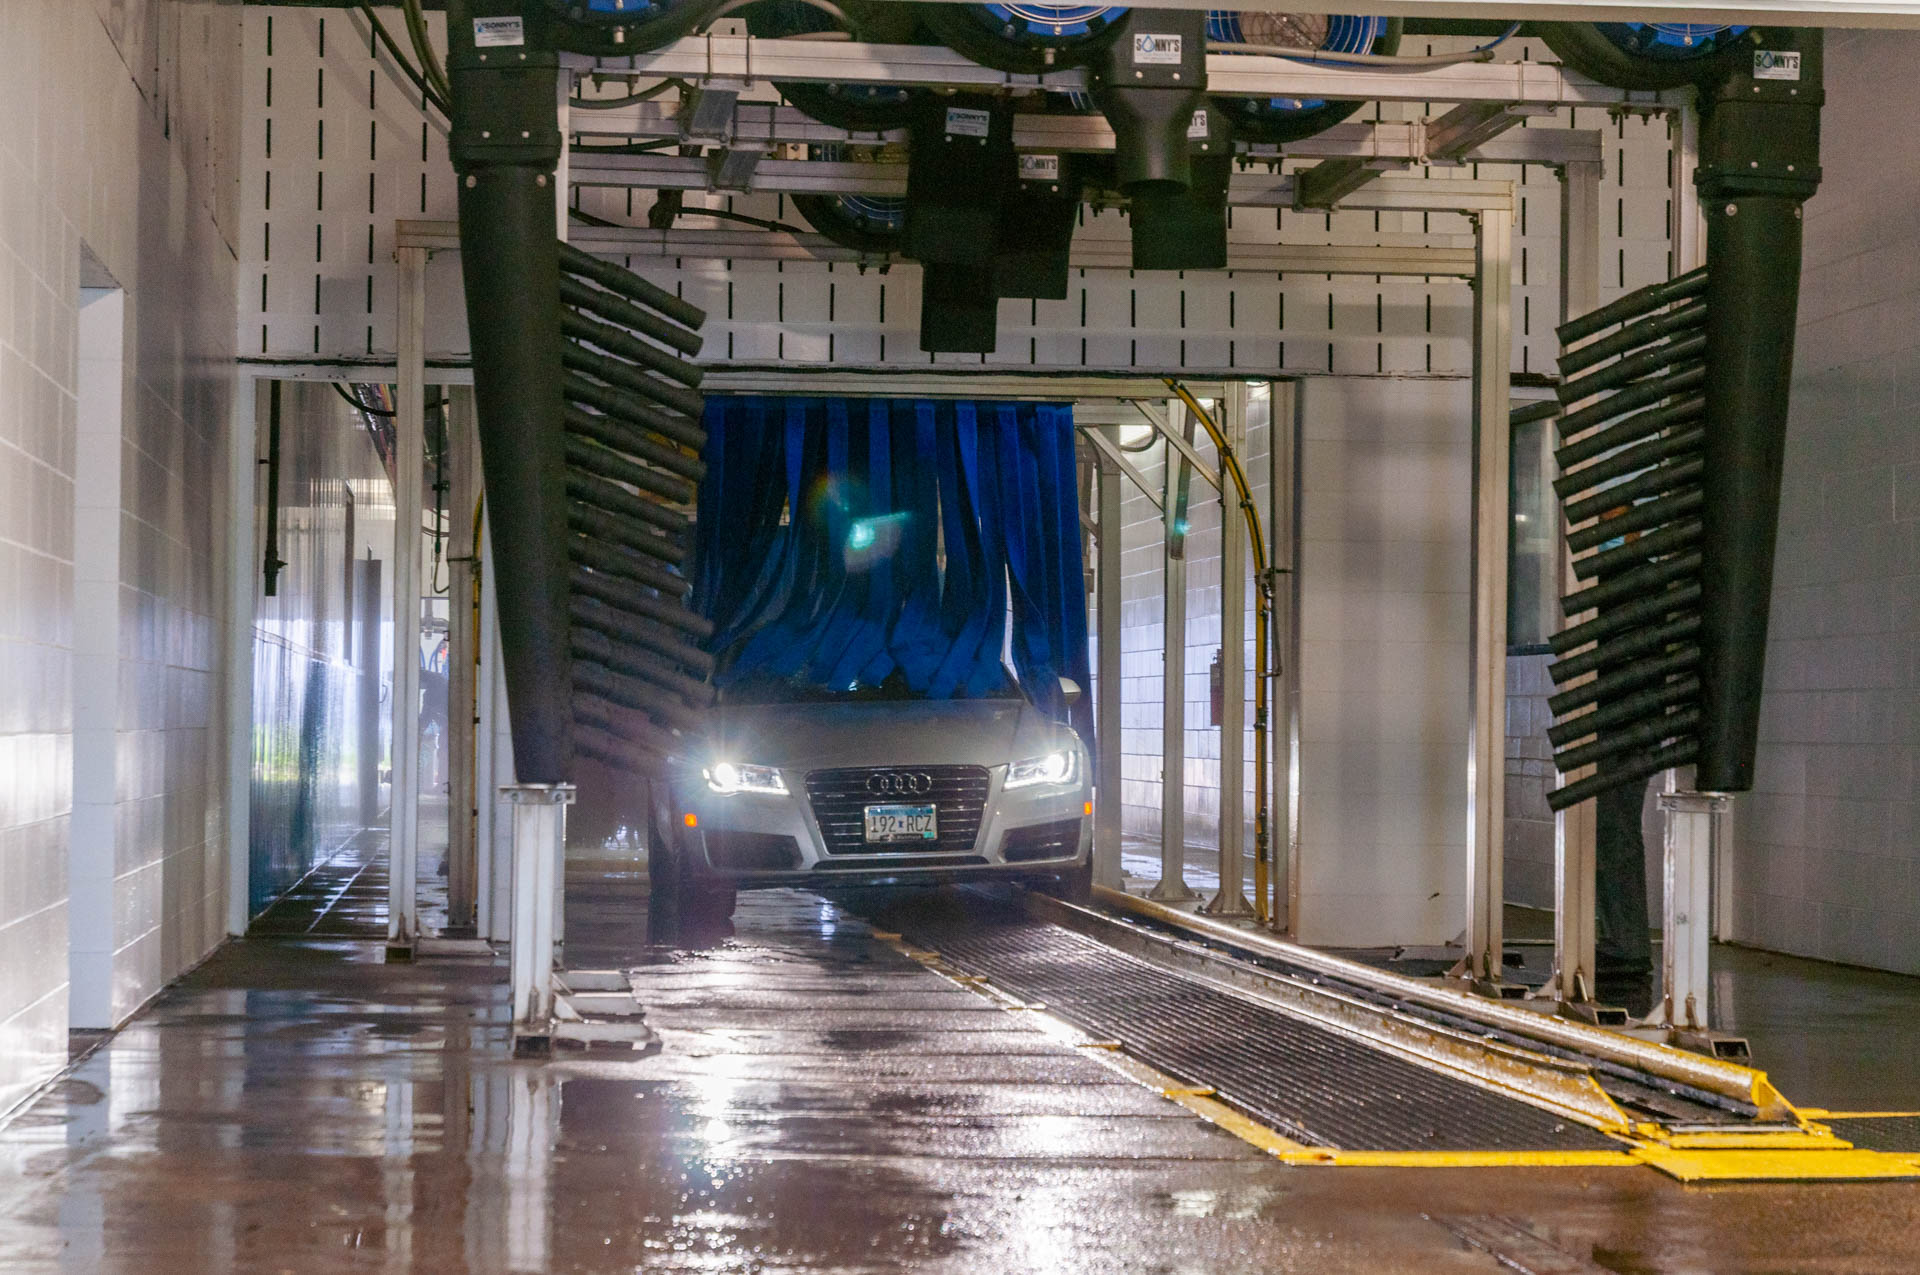 Wash me now: What's the best type of car wash?